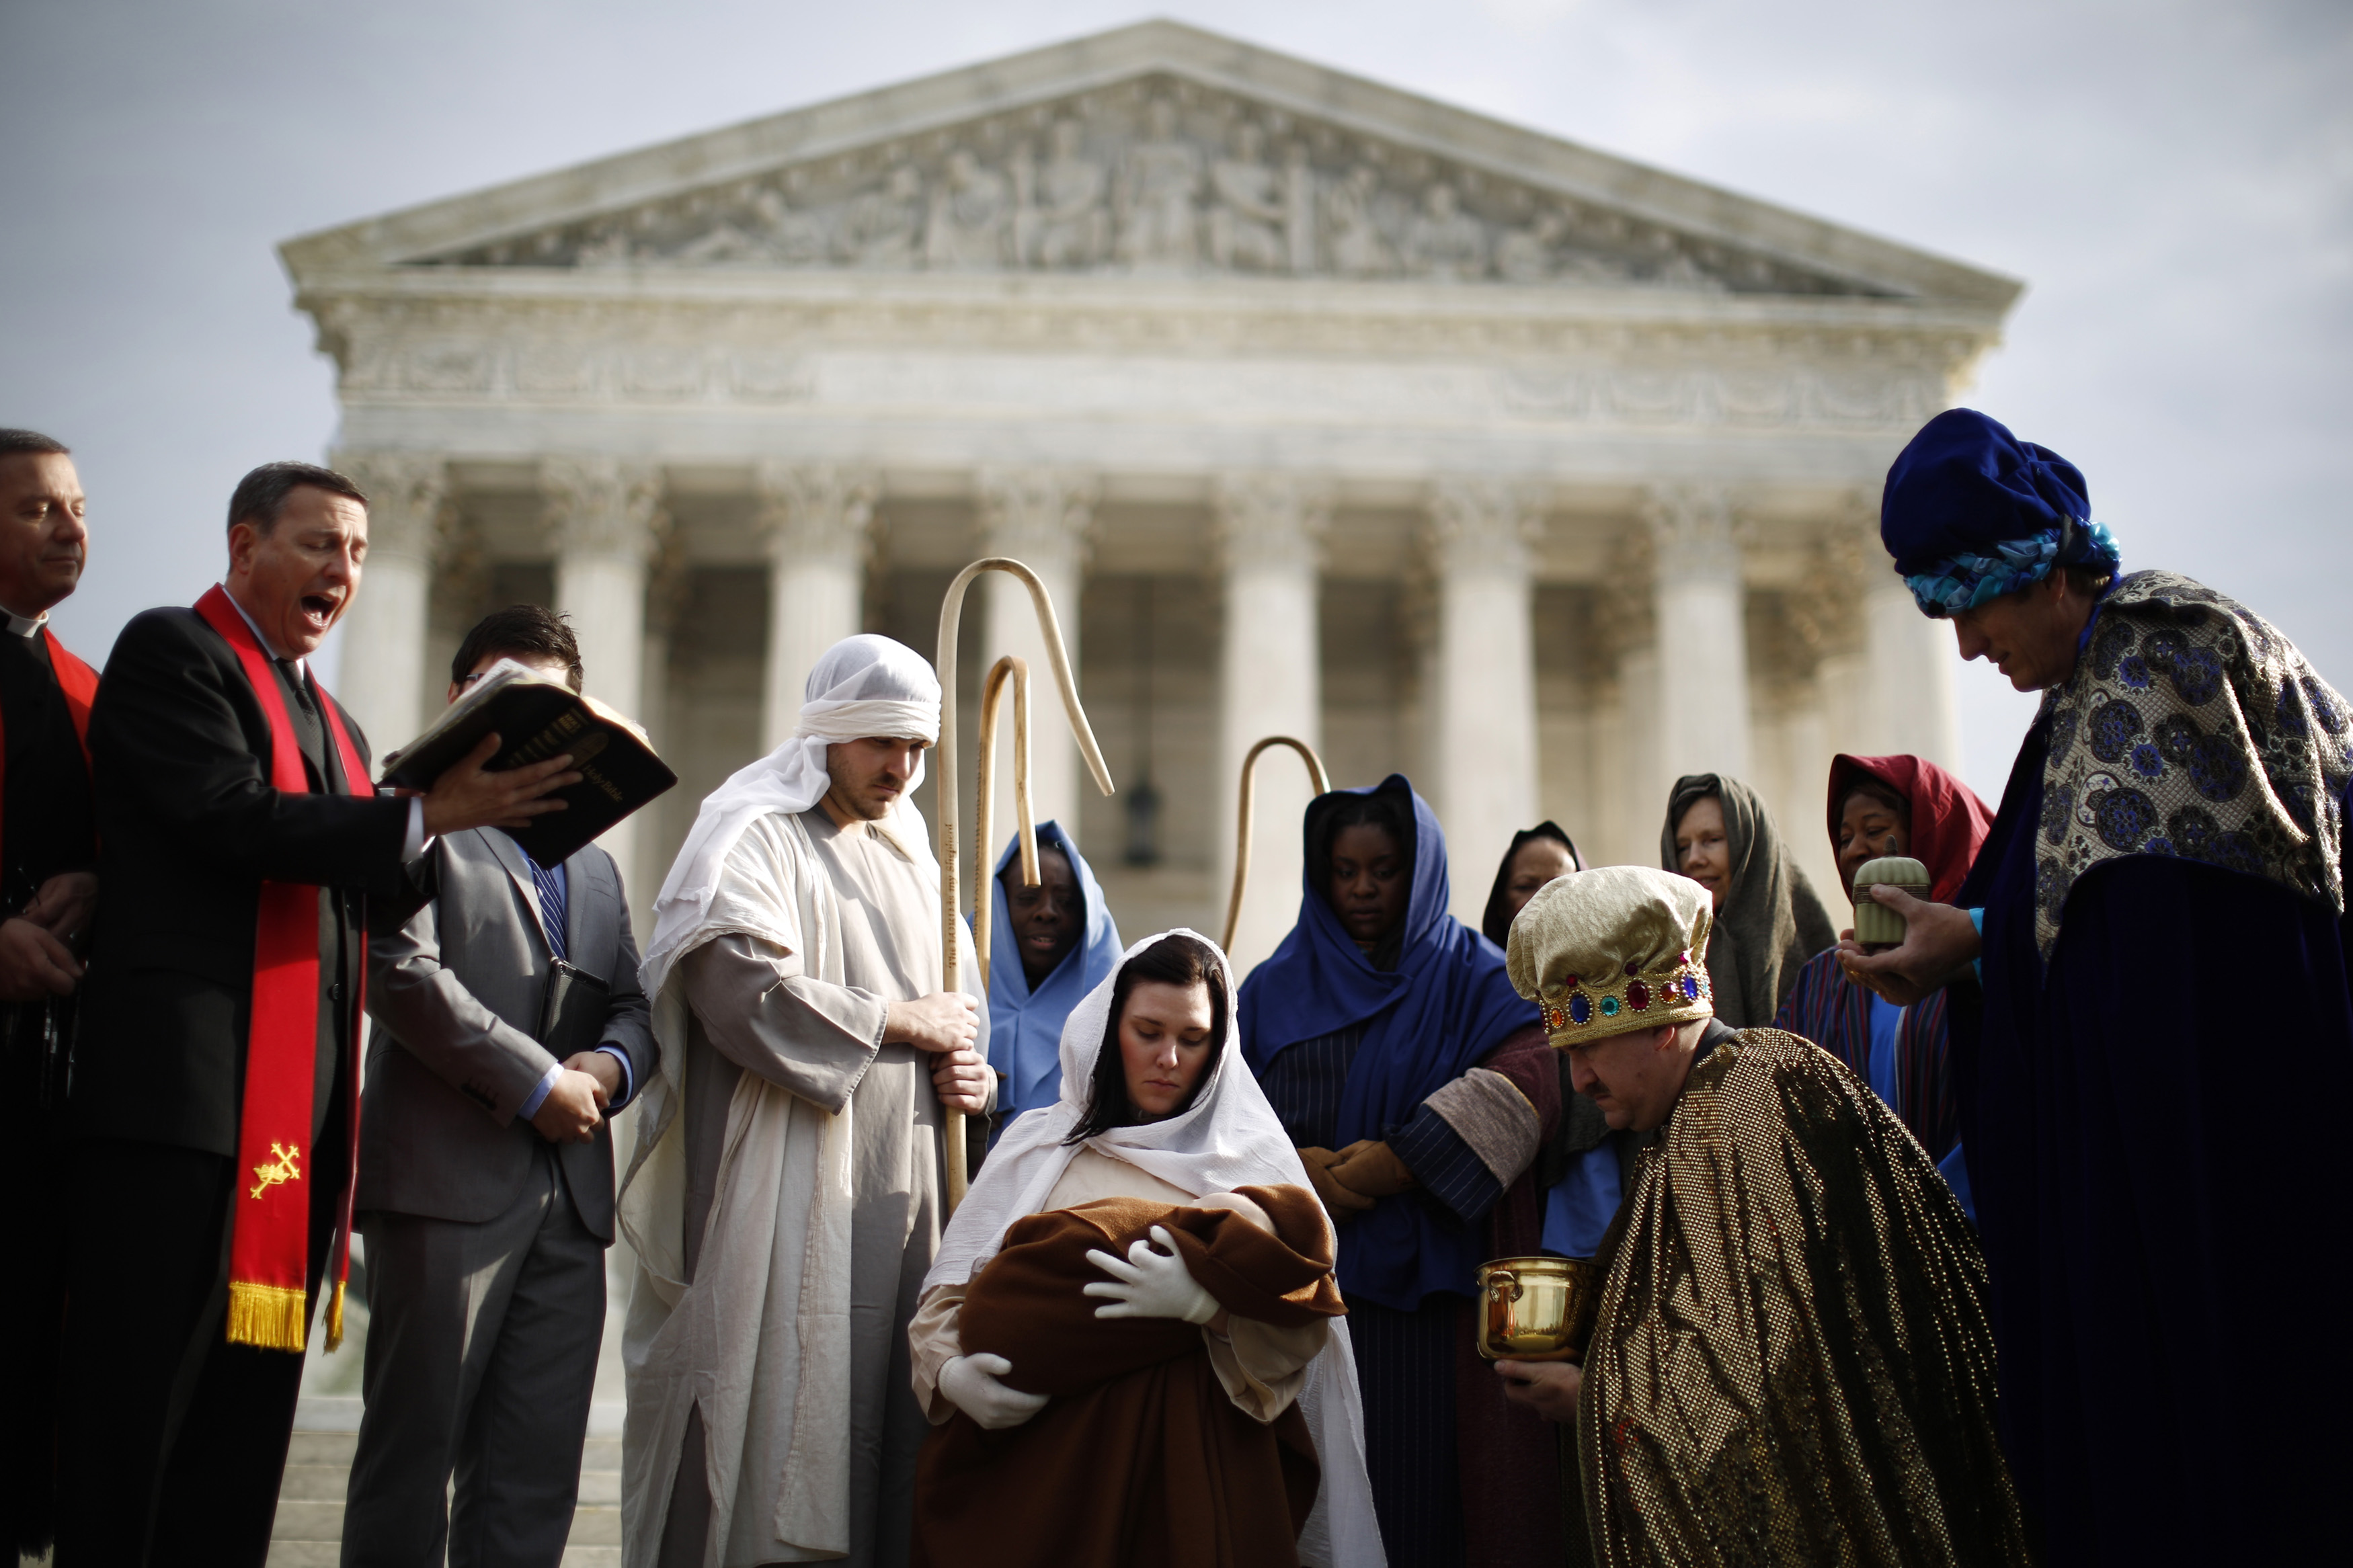 Actors dressed for a nativity scene are pictured during a prayer reading in front of the Supreme Court in Washington December 3, 2013. REUTERS/Jason Reed